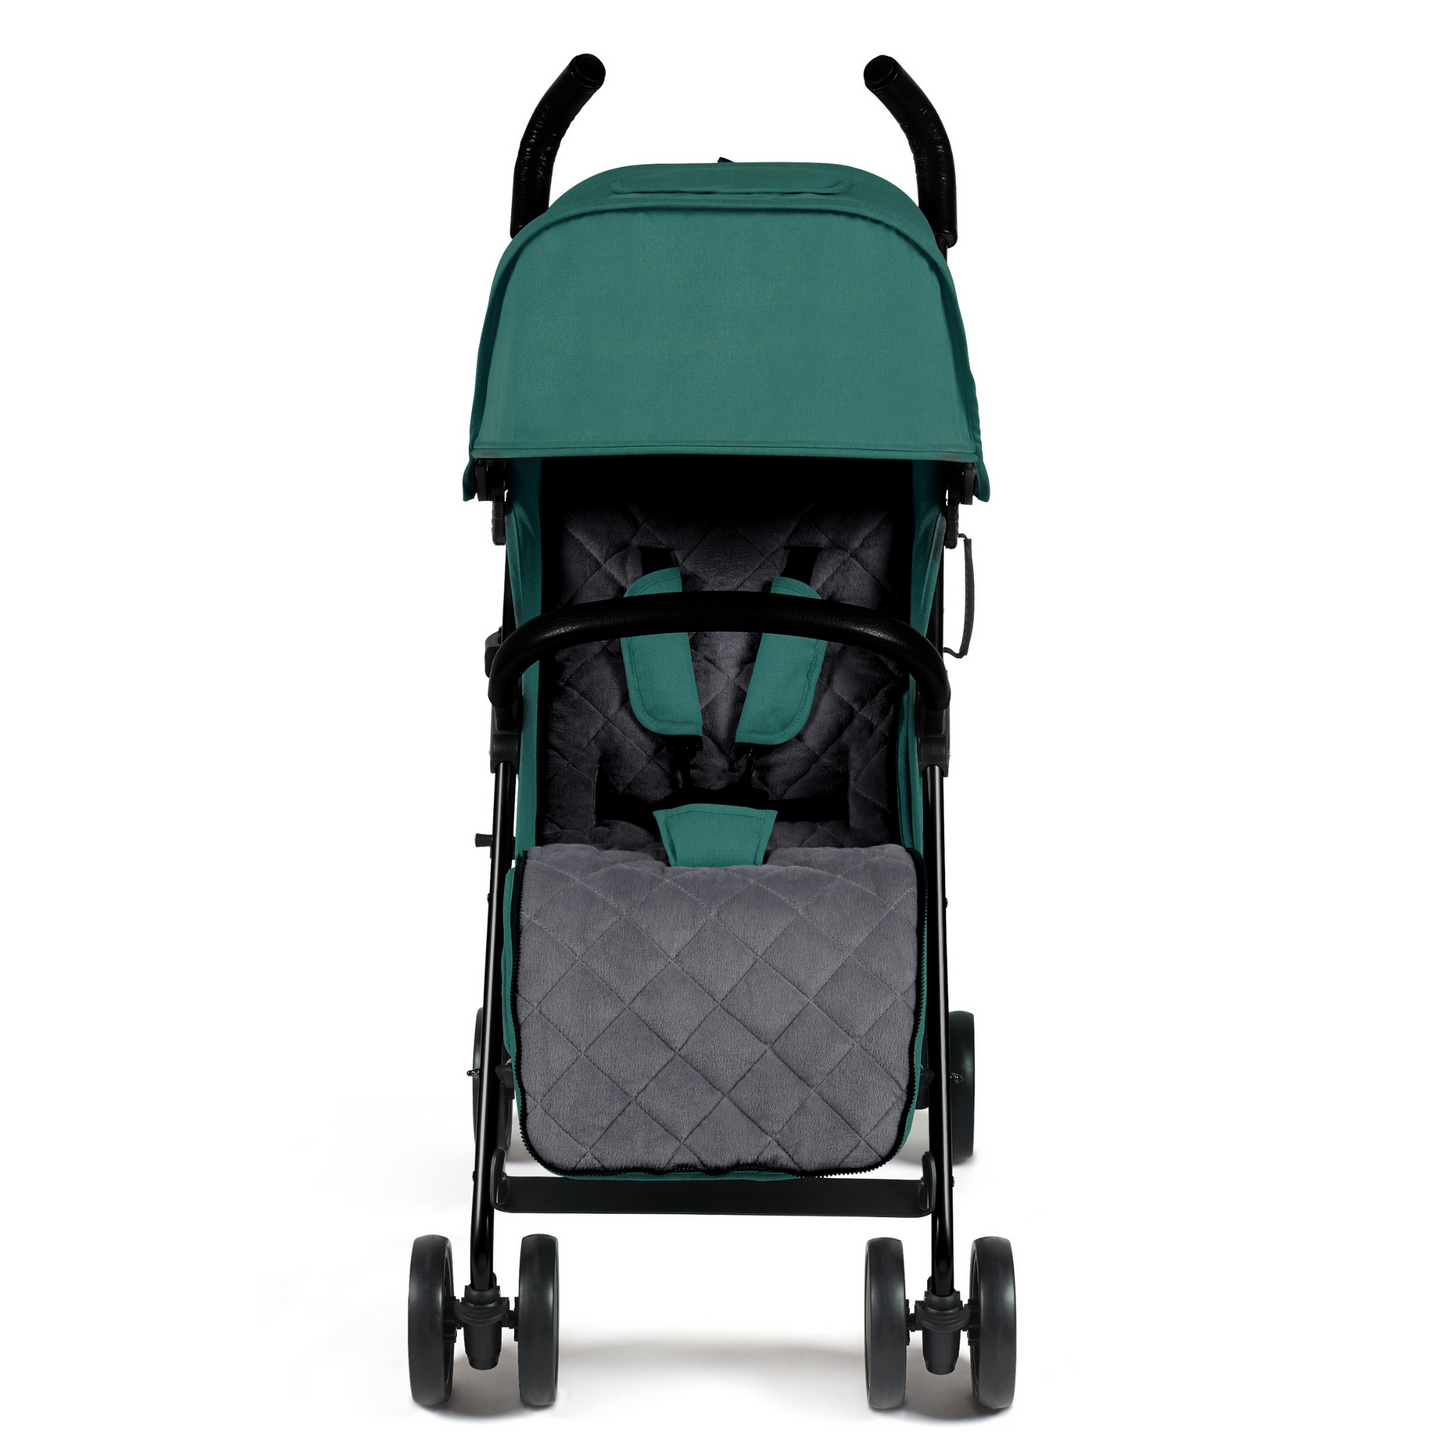 Ickle Bubba Discovery Max Stroller - Teal